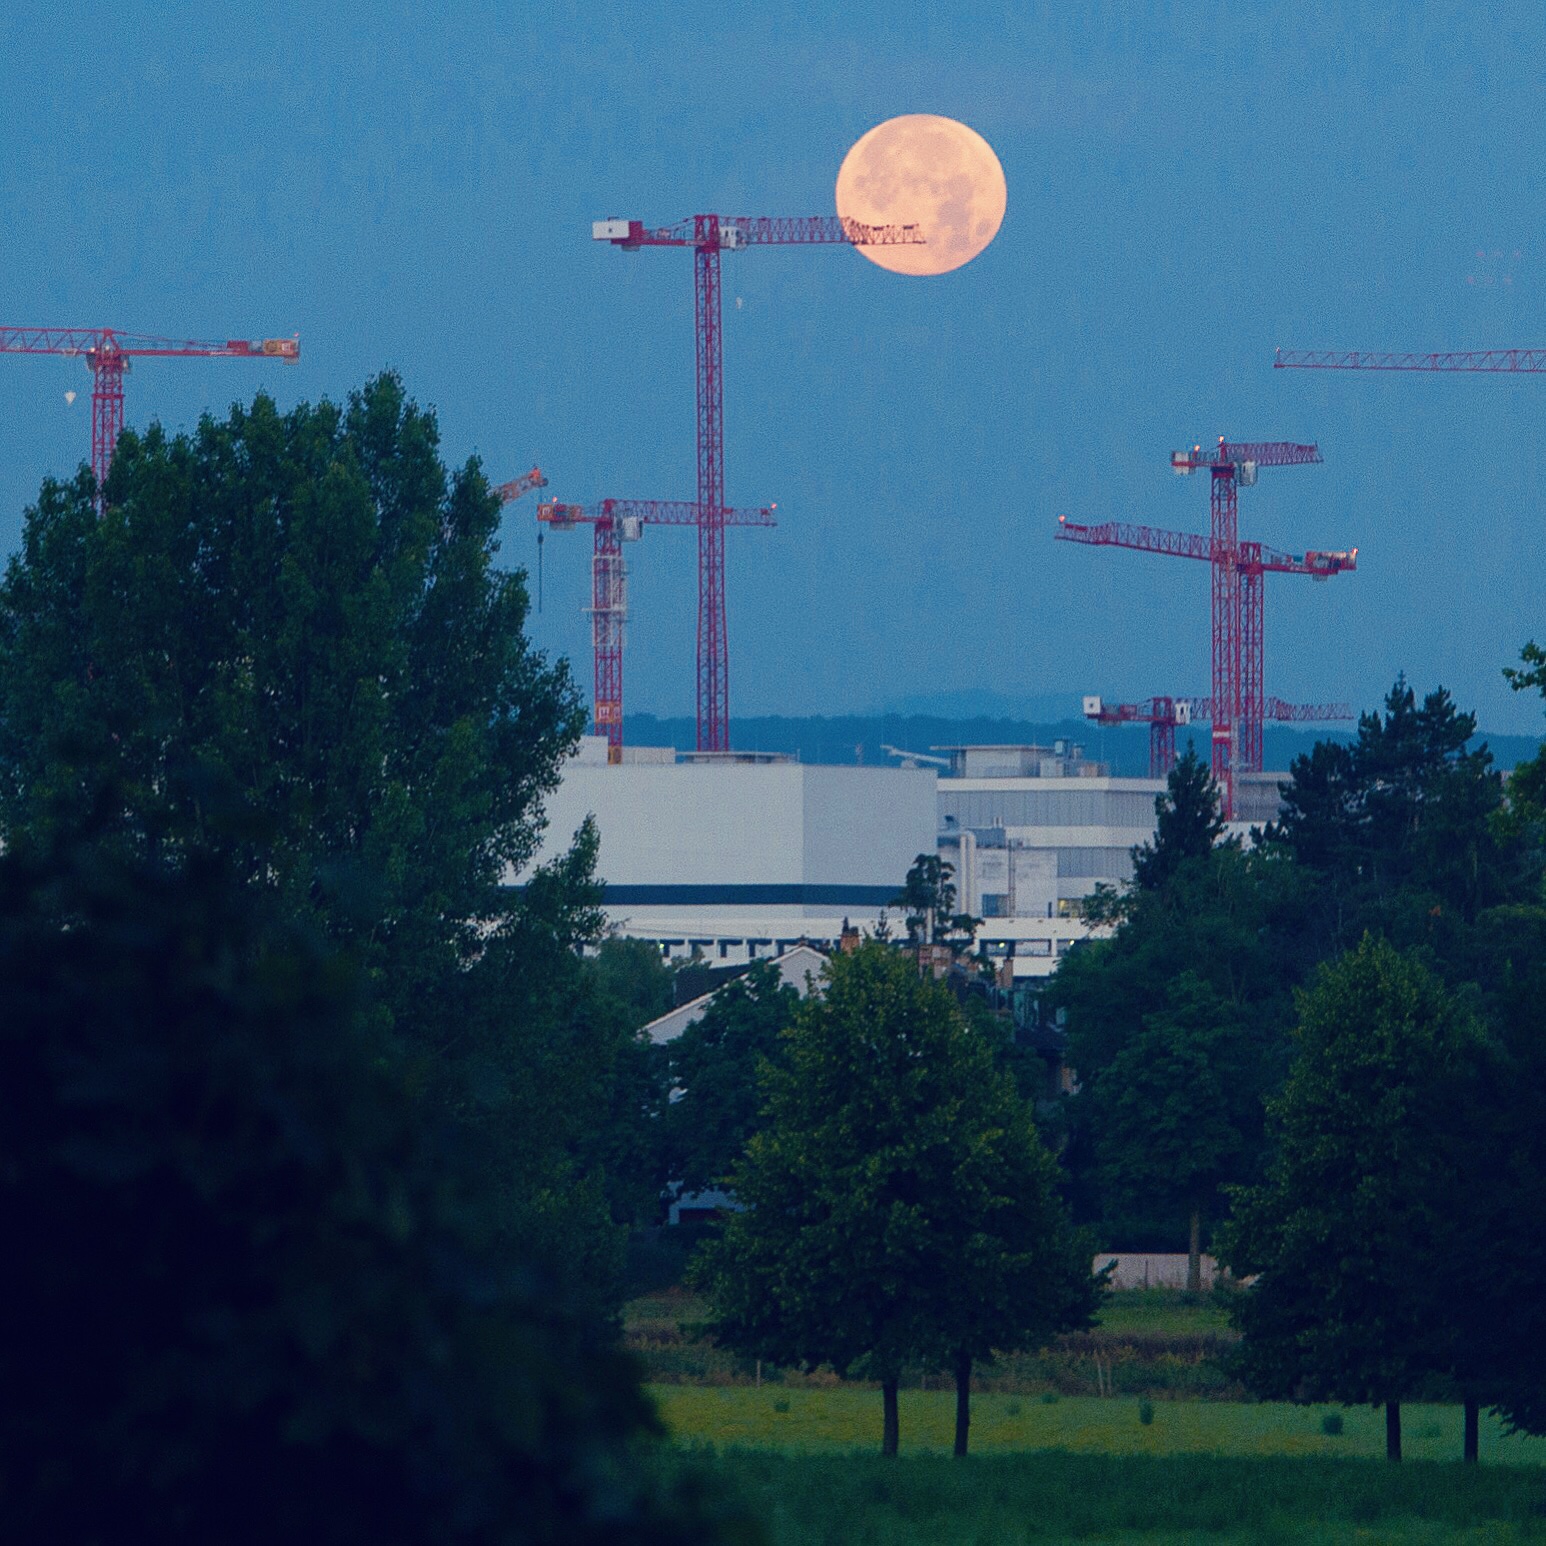 Moon over the crane forest